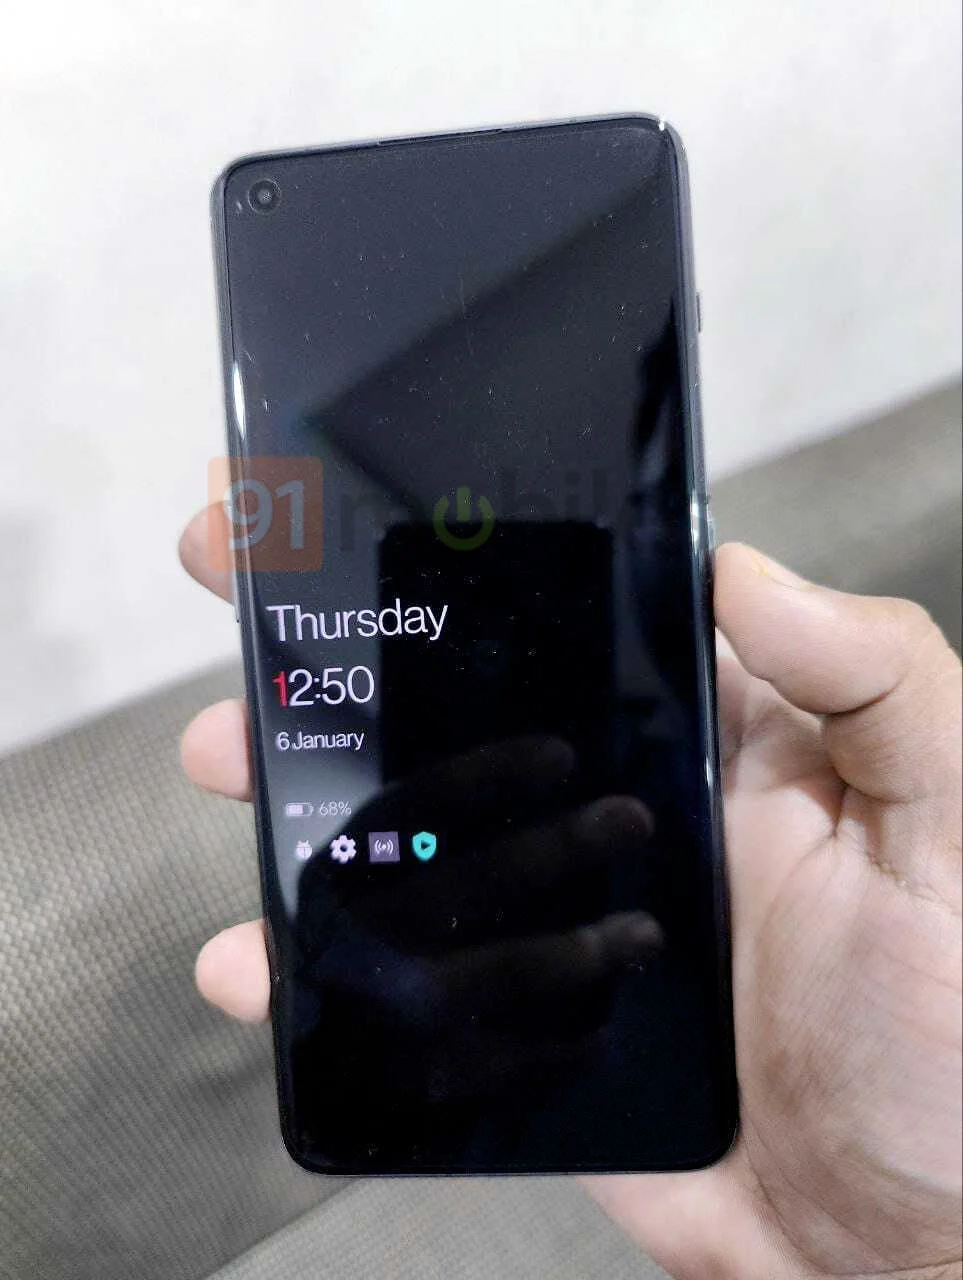 image 62 - OnePlus 11 images leaked before the official launch in China